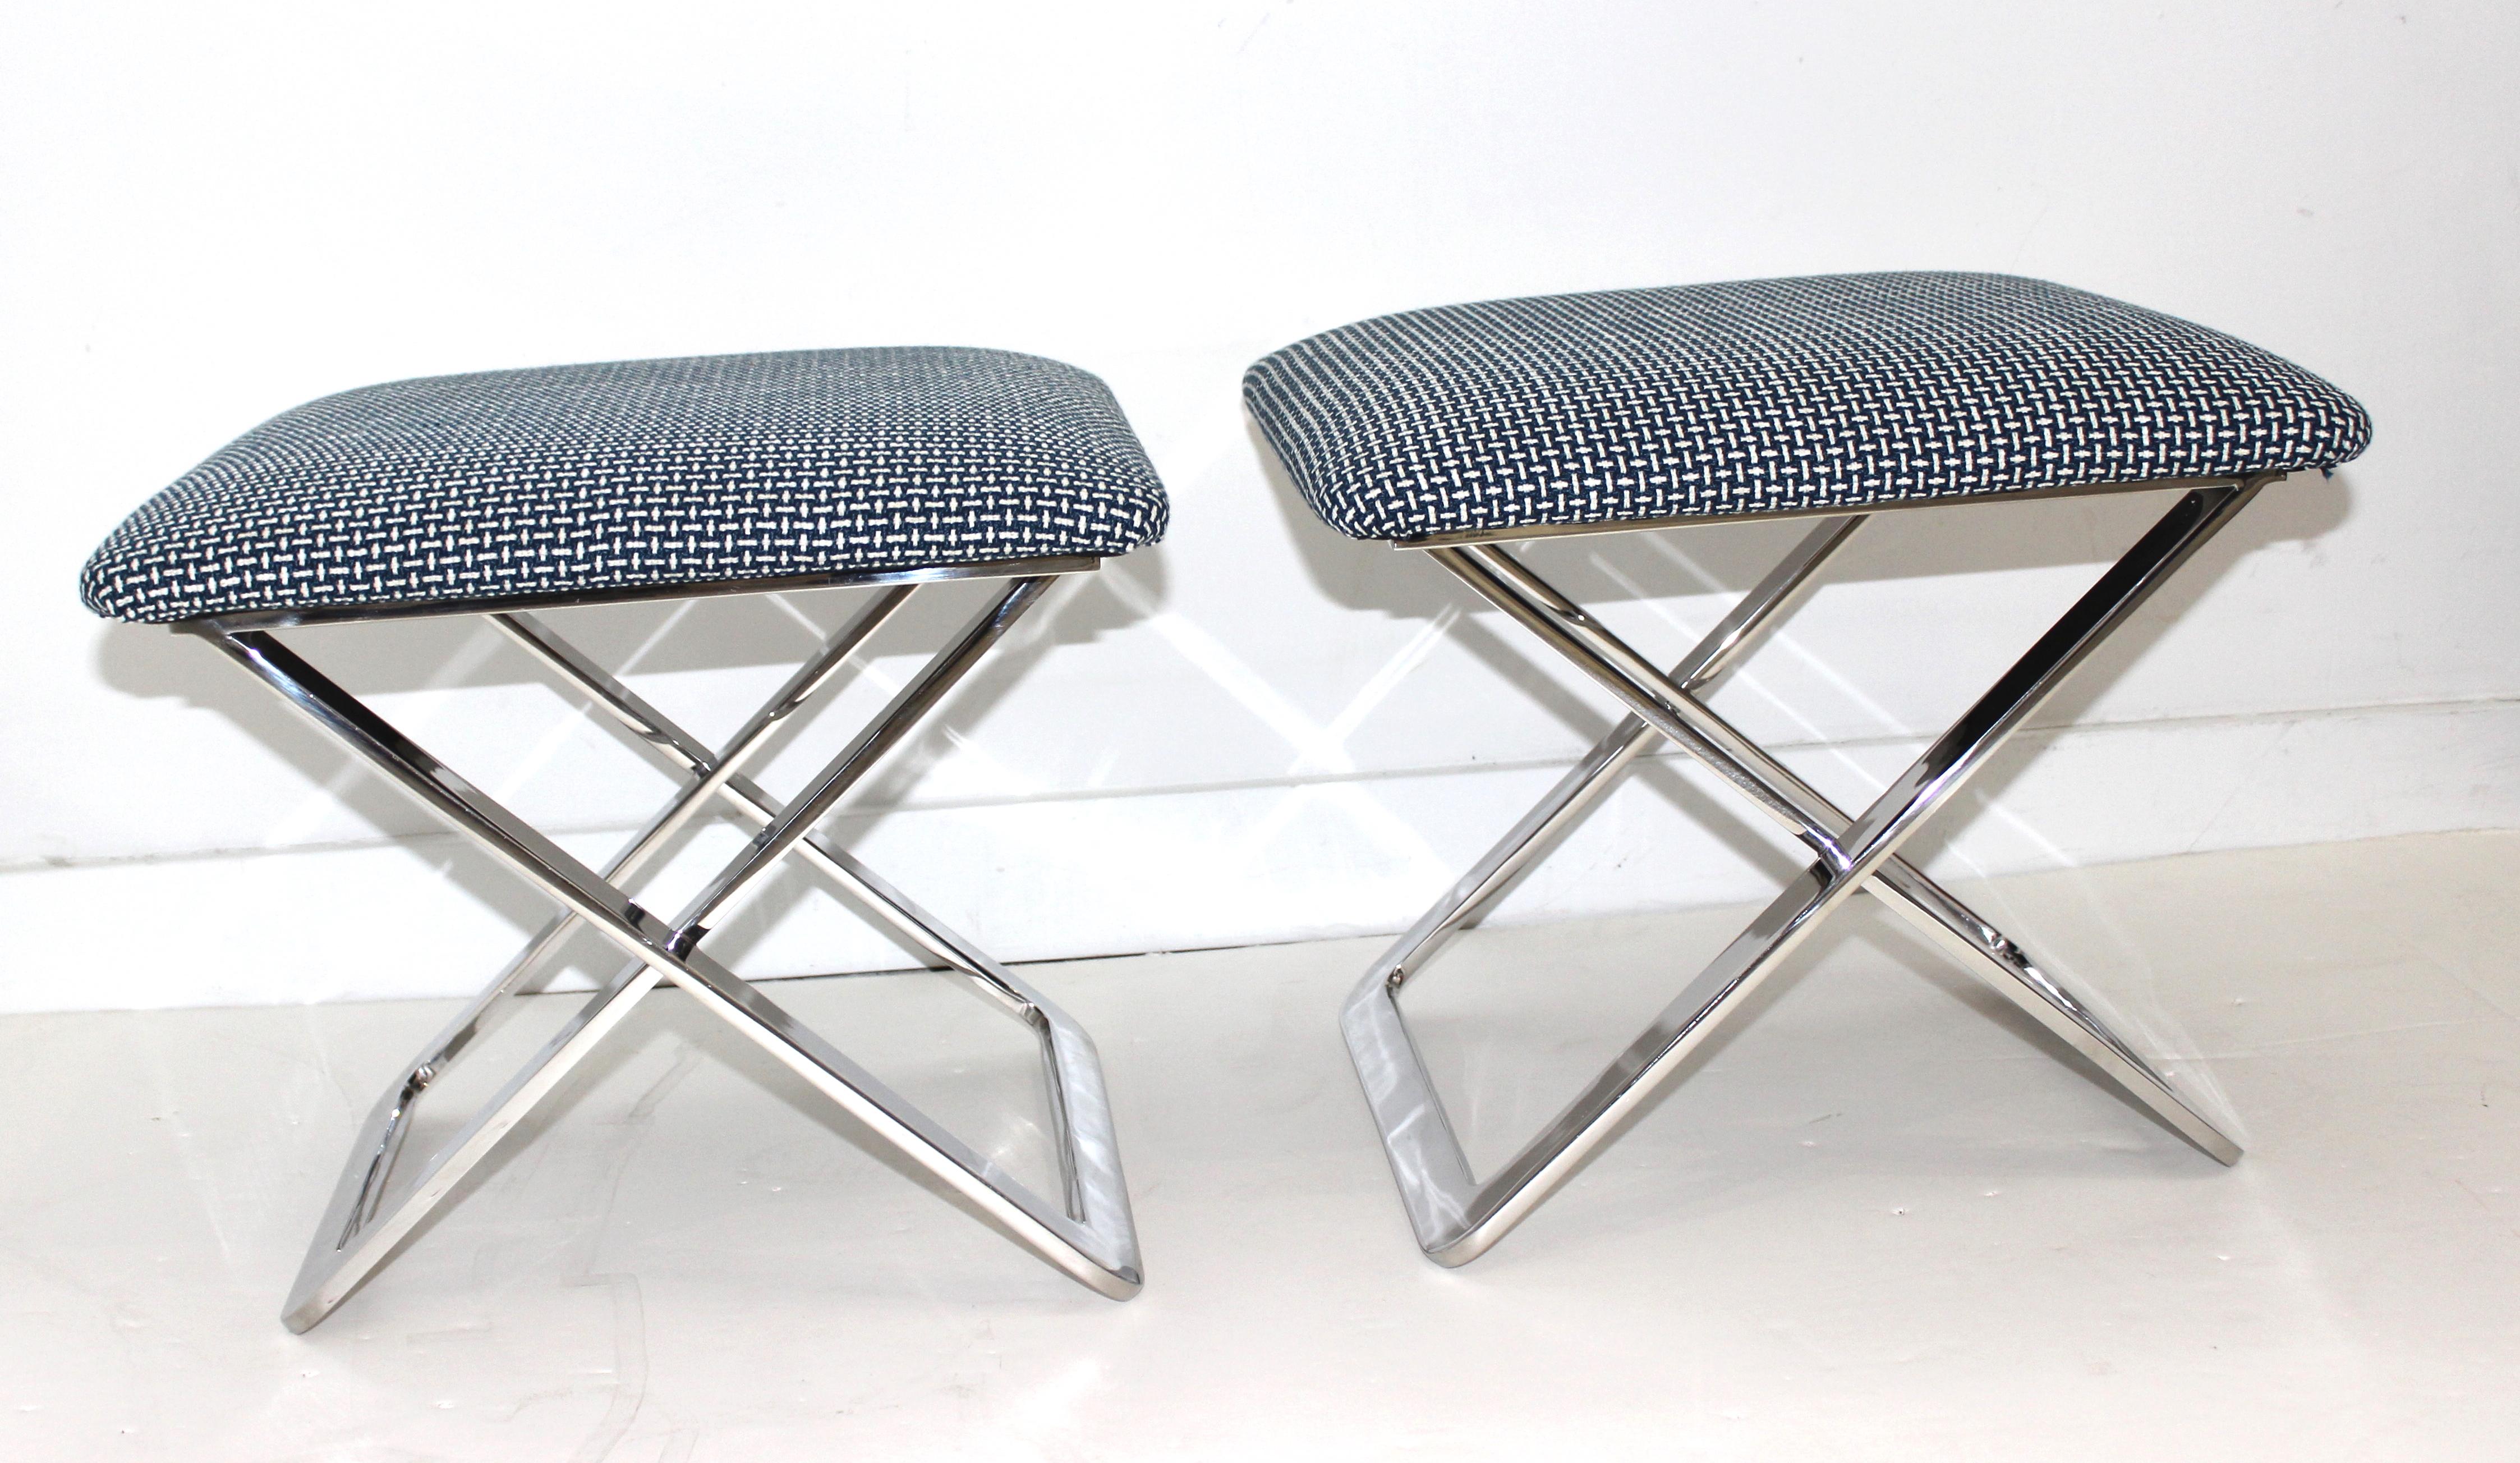 Super-chic pair of Mid-Century Modern X-Stools in polished stainless steel attributed to Milo Baughman. Newly re-upholstered.